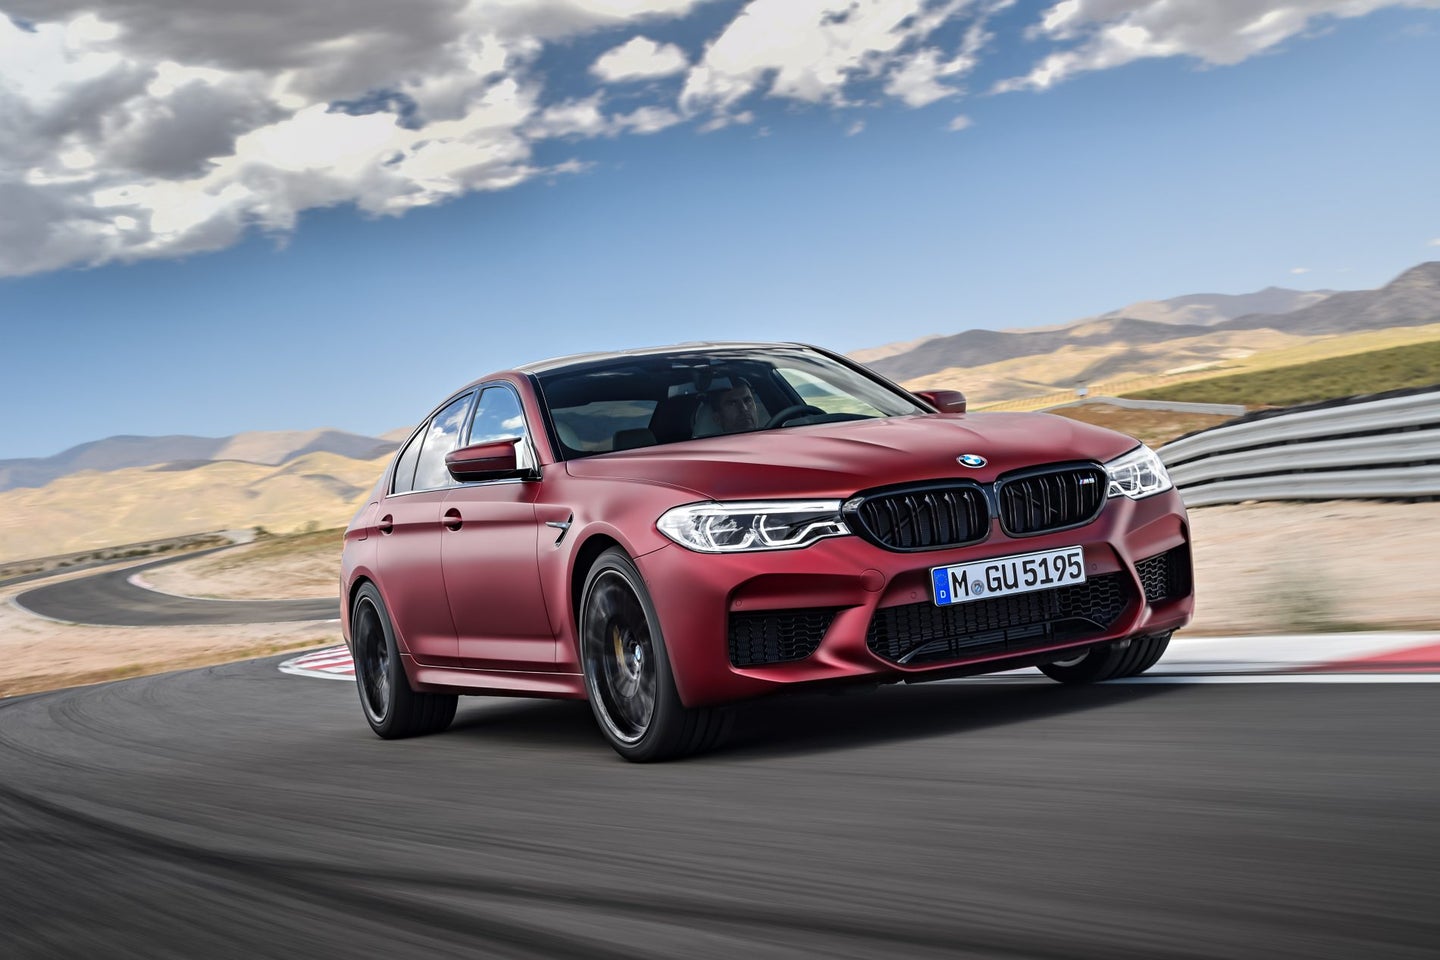 The New 2018 BMW F90 M5 Joins Its Predecessors on the Track